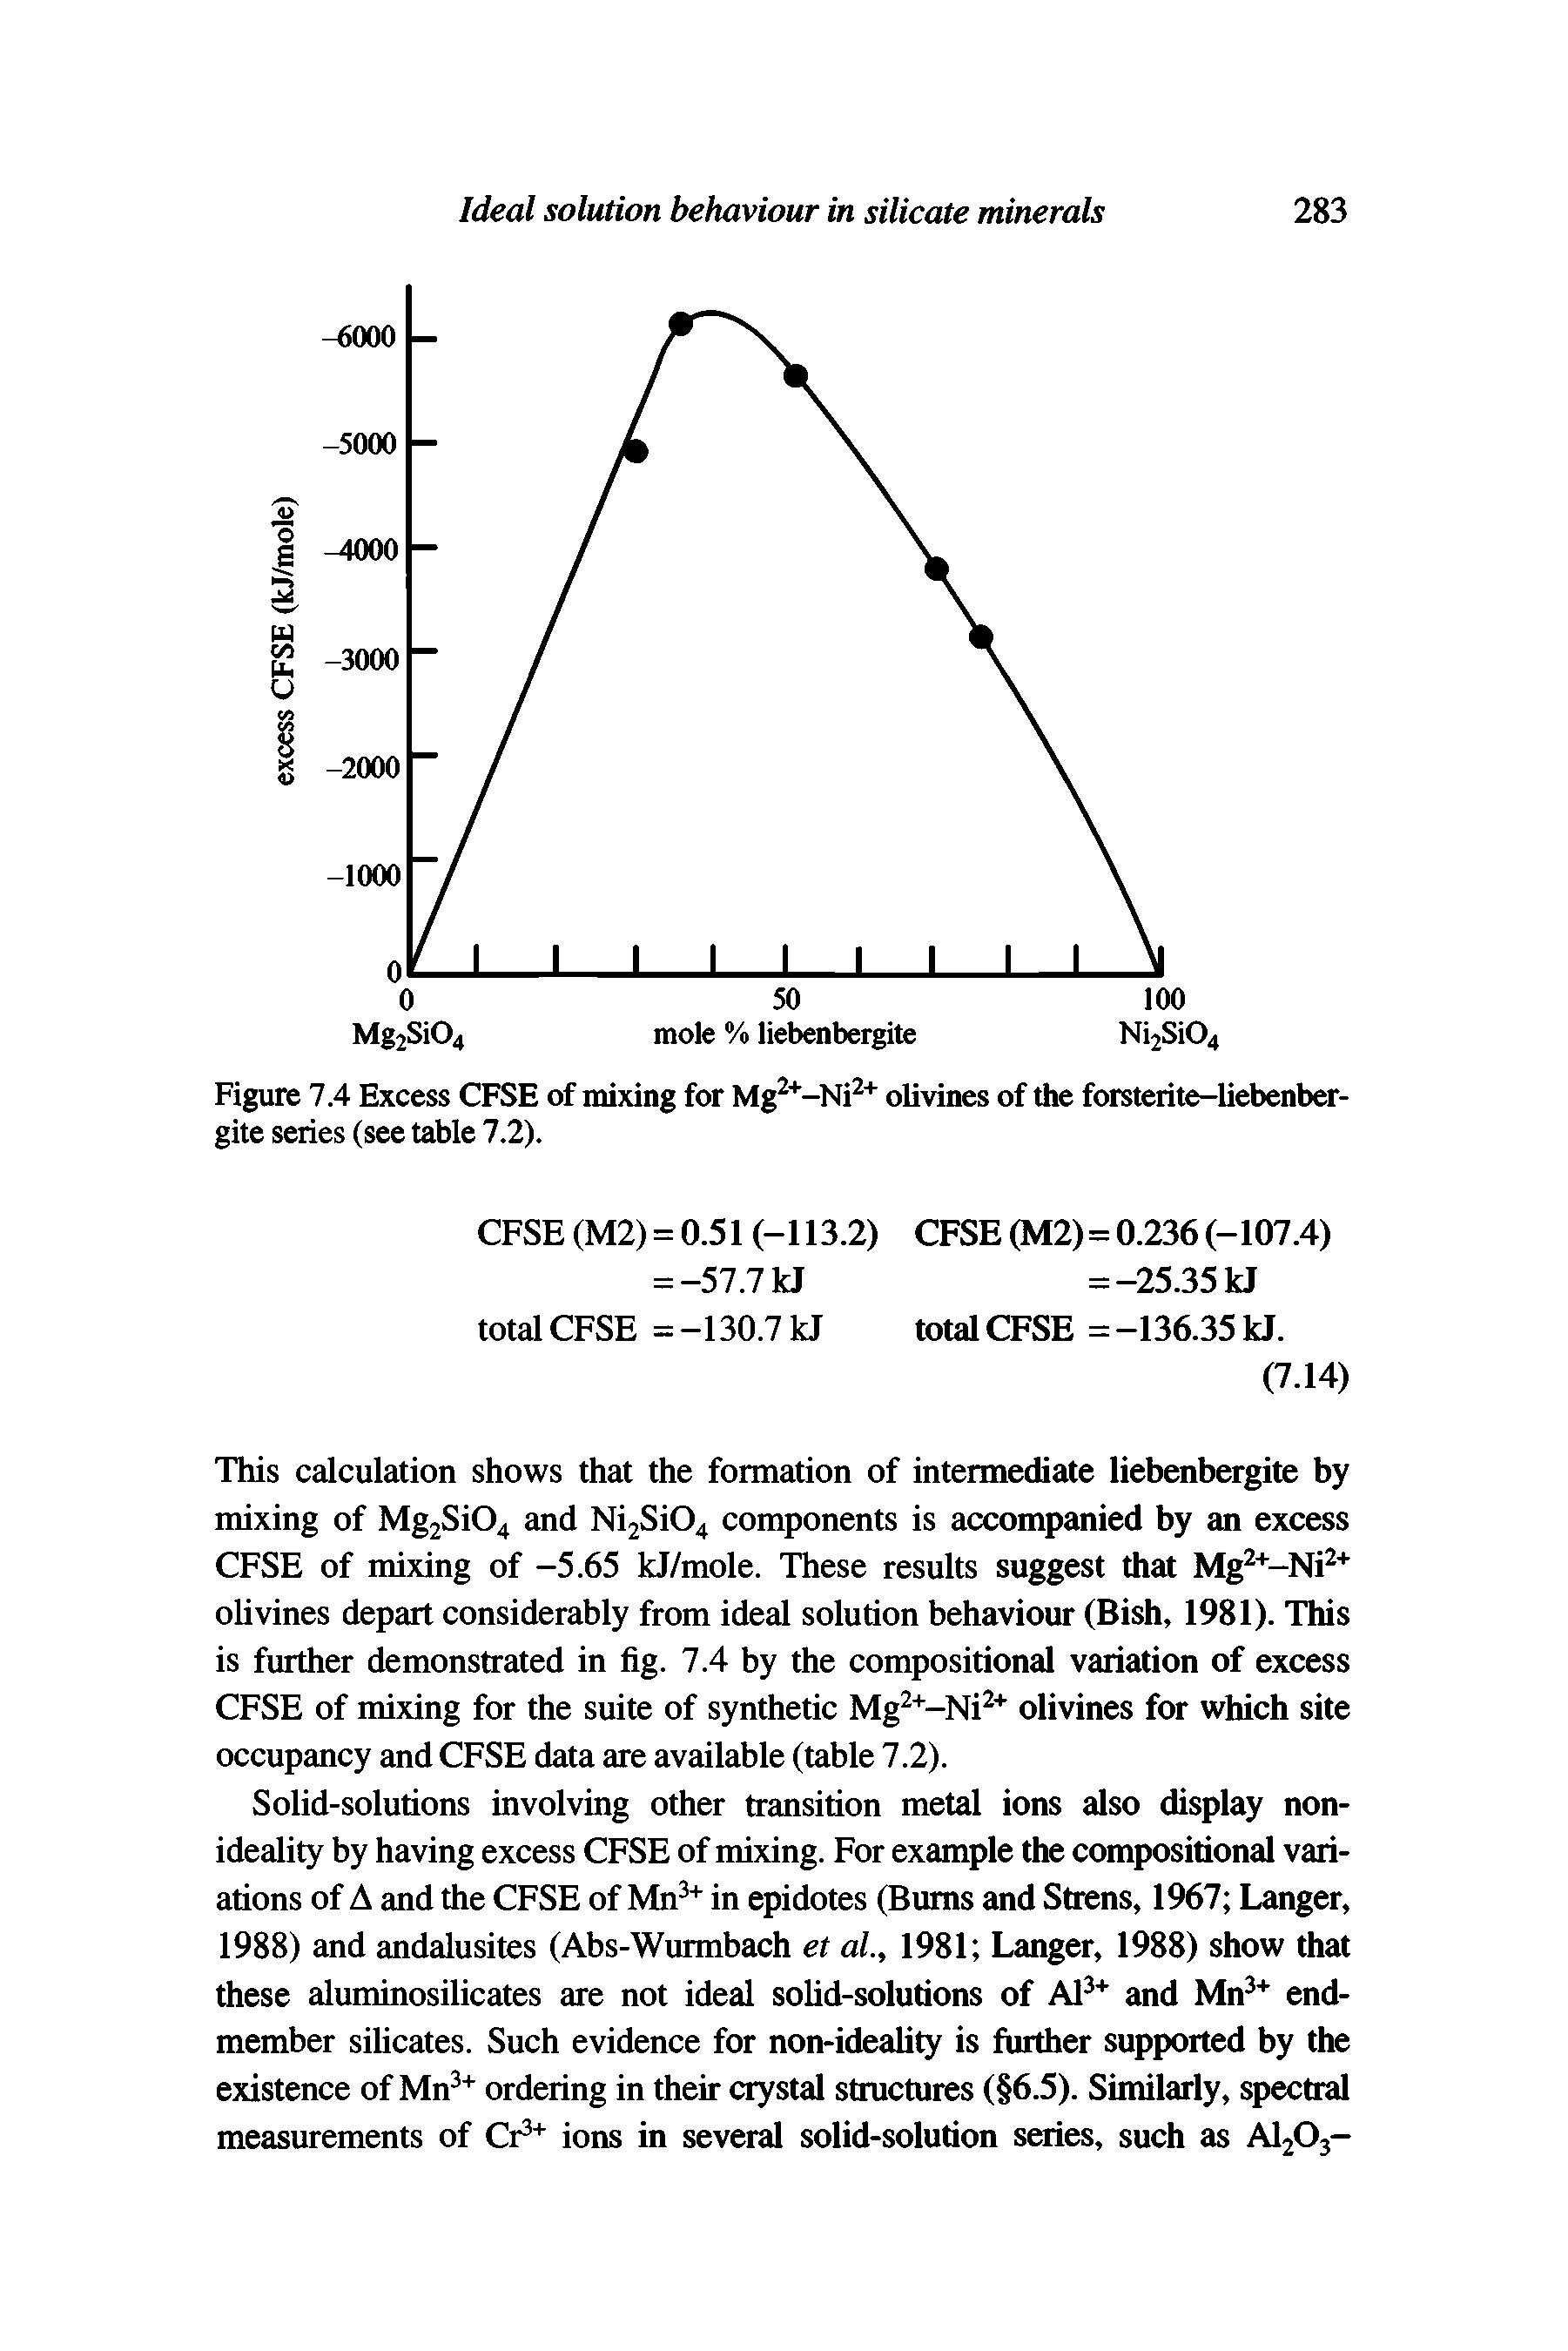 Figure 7.4 Excess CFSE of mixing for Mg2+-Ni2+ olivines of the forsterite-liebenber-gite series (see table 7.2).